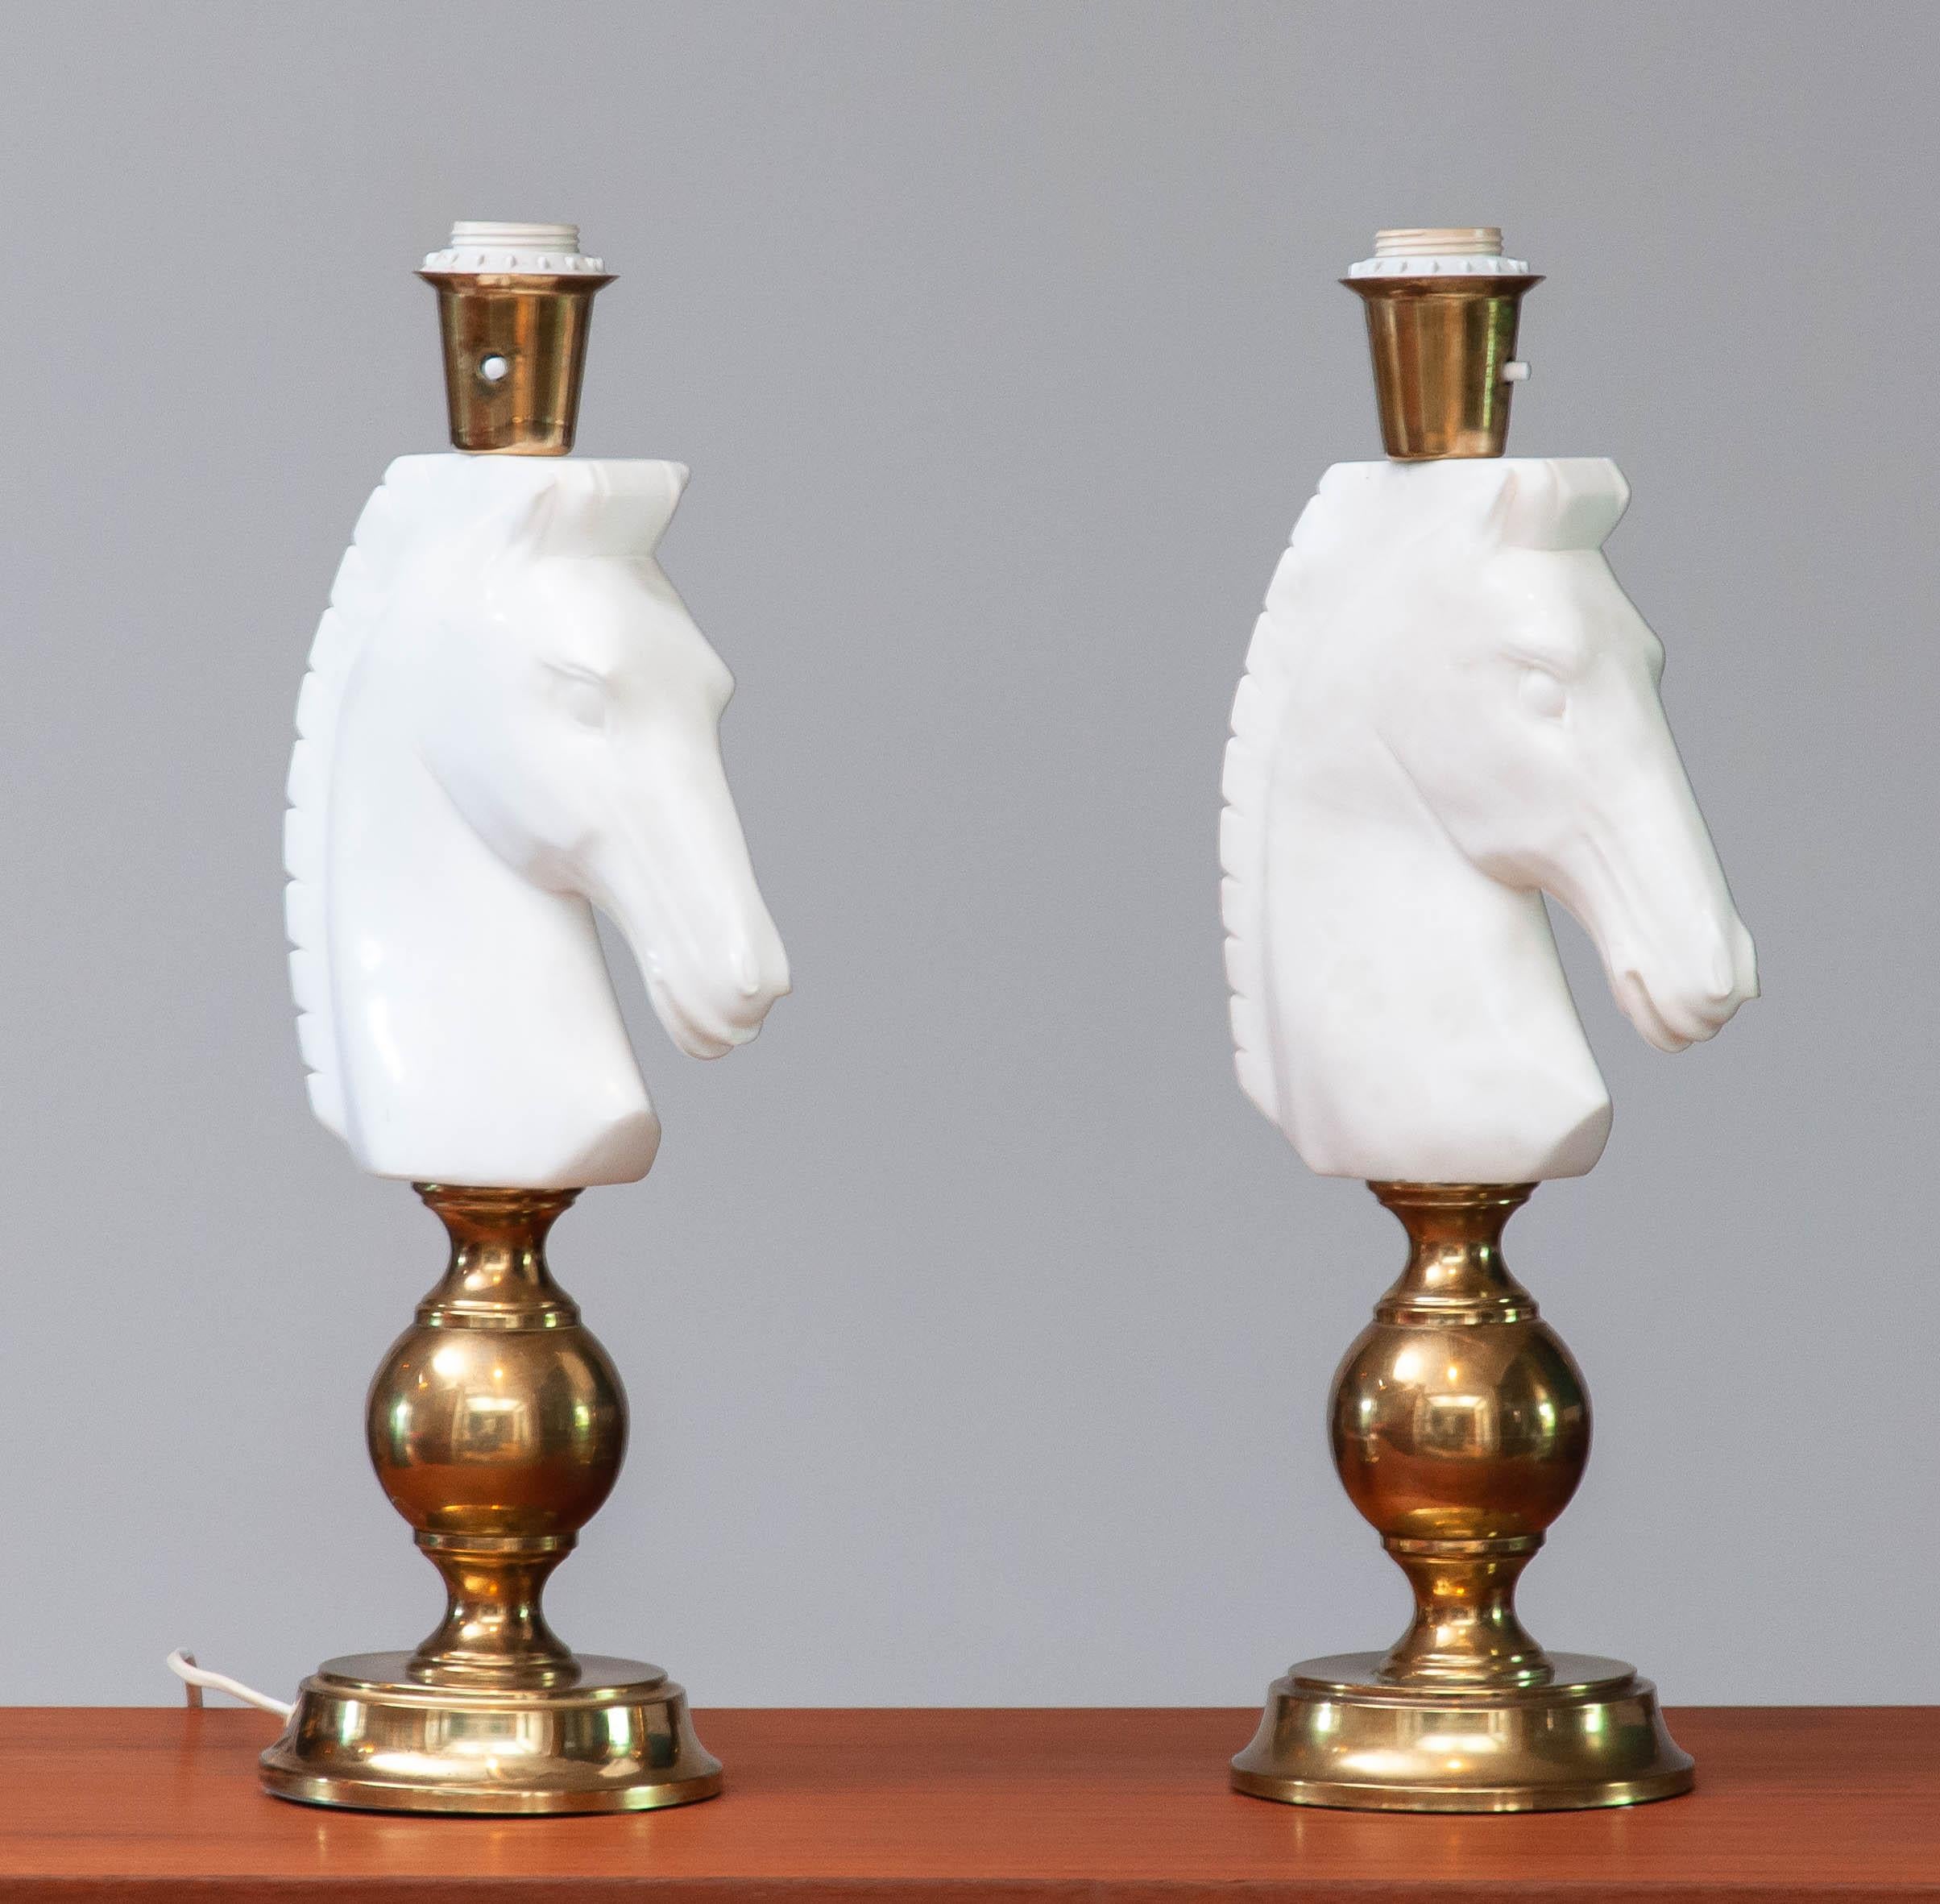 Pair 1970's Brass Table Lamps with Large White Italian Alabaster Horse Heads In Good Condition For Sale In Silvolde, Gelderland